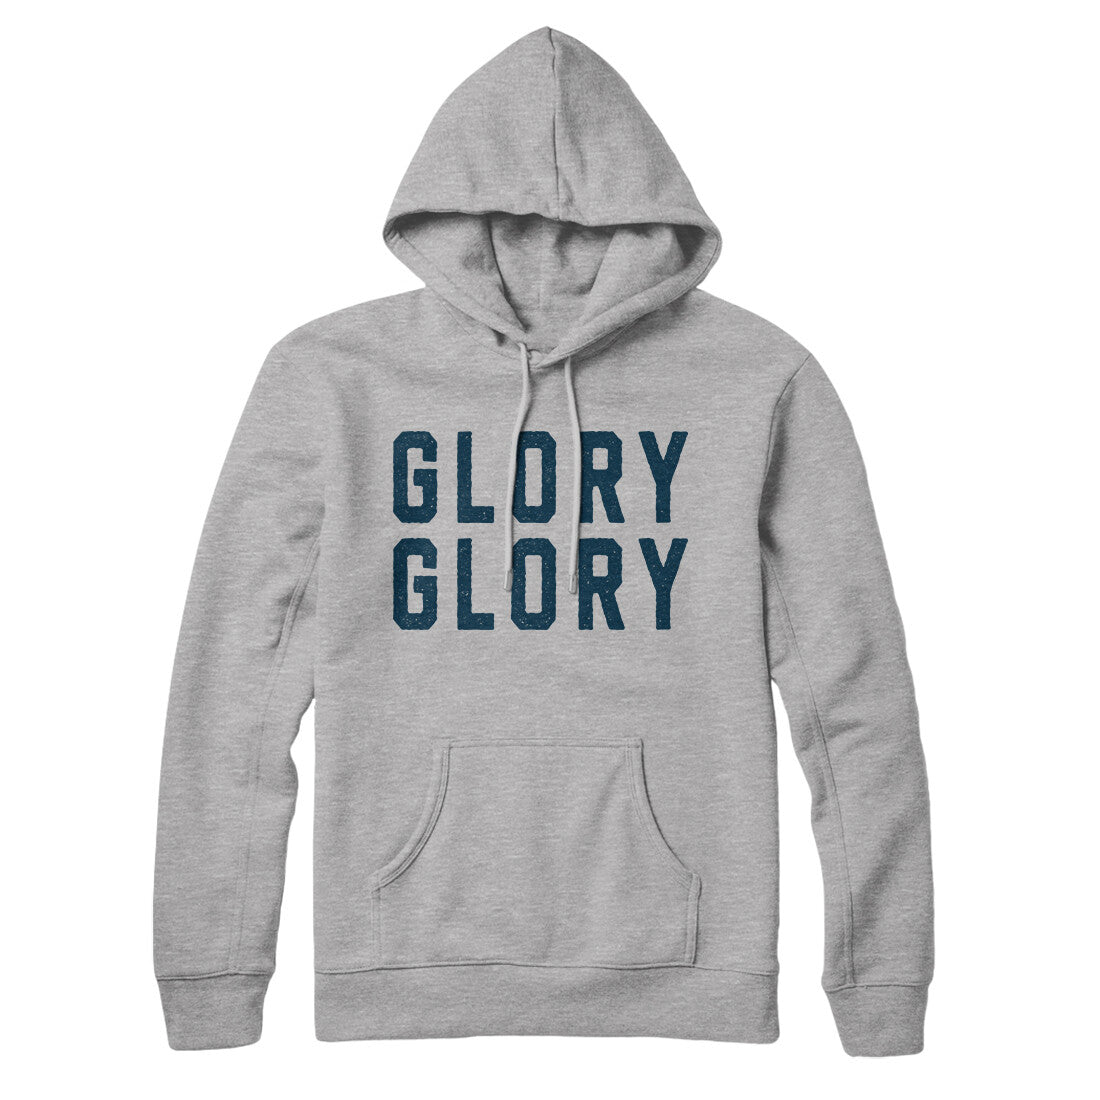 Glory Glory in Heather Grey Color